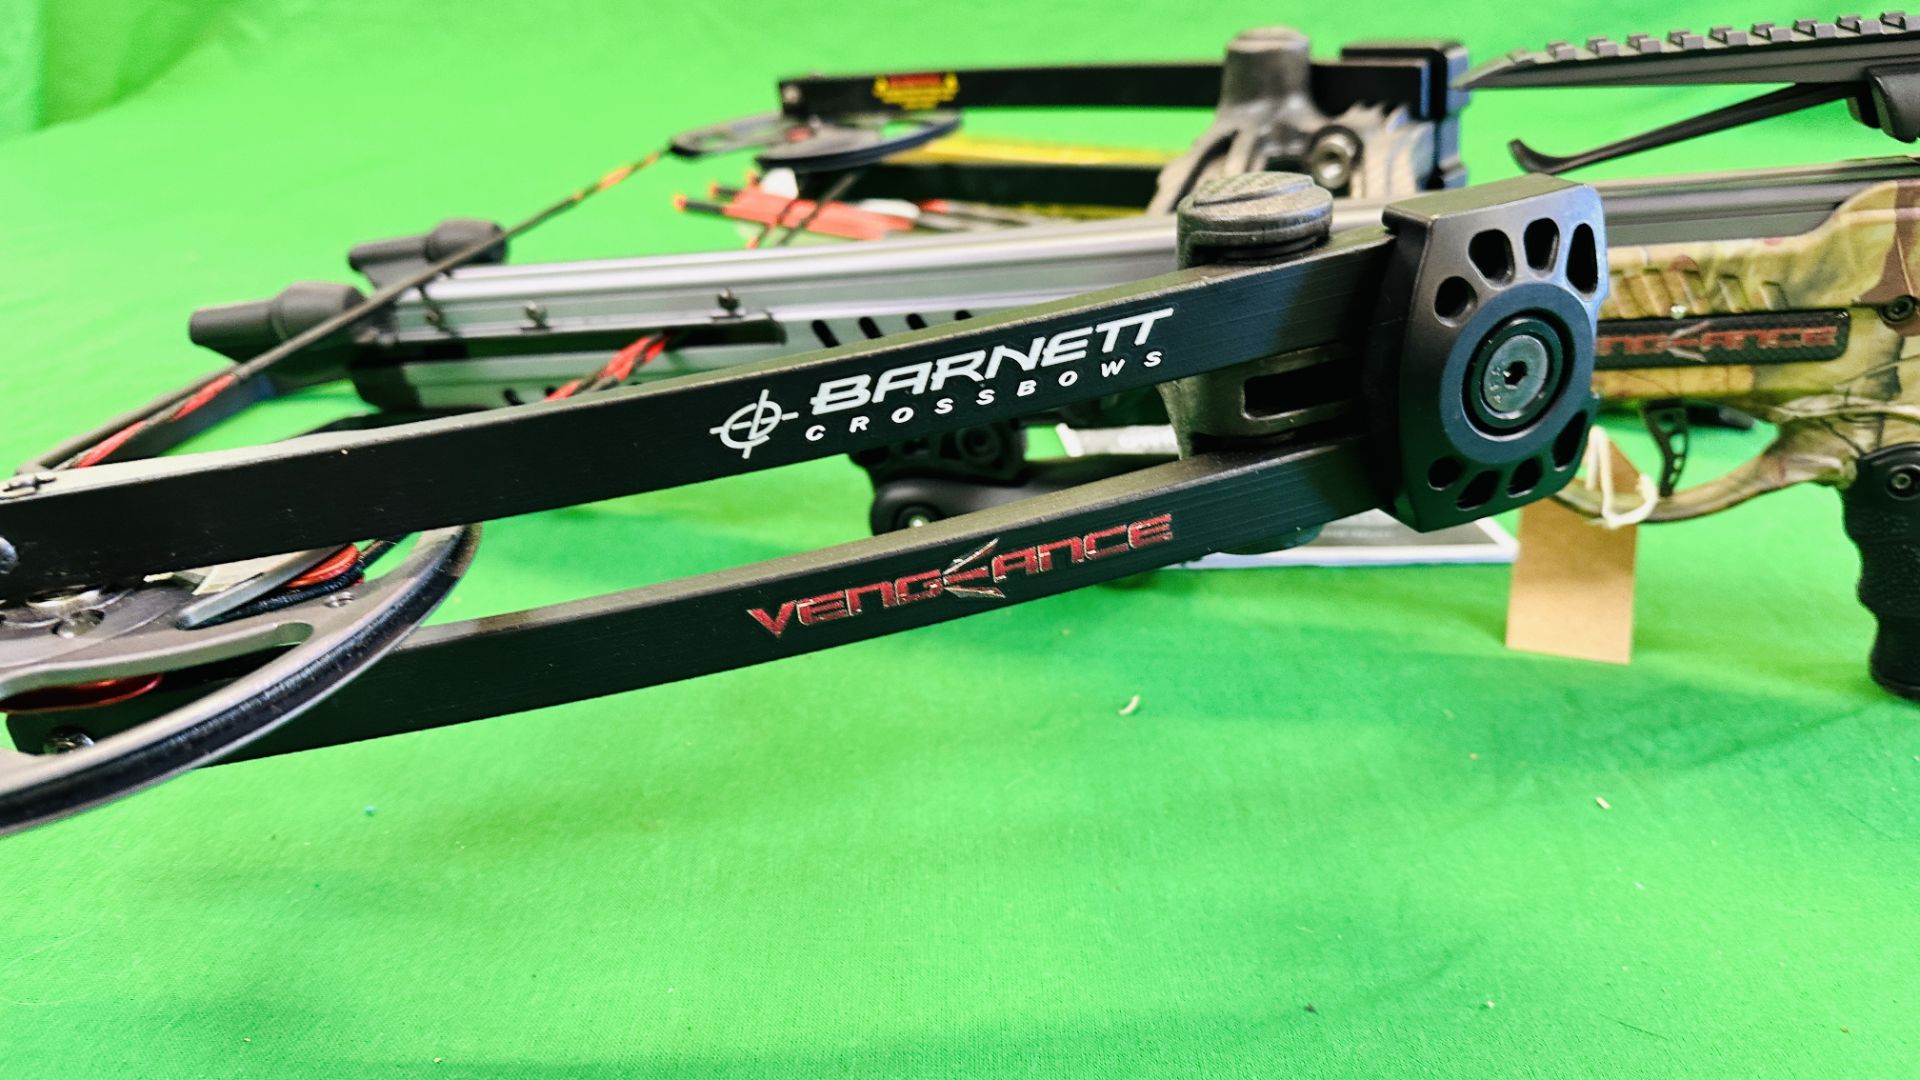 BARNETT "VENGANCE" COMPOUND CROSSBOW COMPLETE WITH THREE CARBON FIBRE CROSSBOW BOLTS, QUIVER, - Image 22 of 35